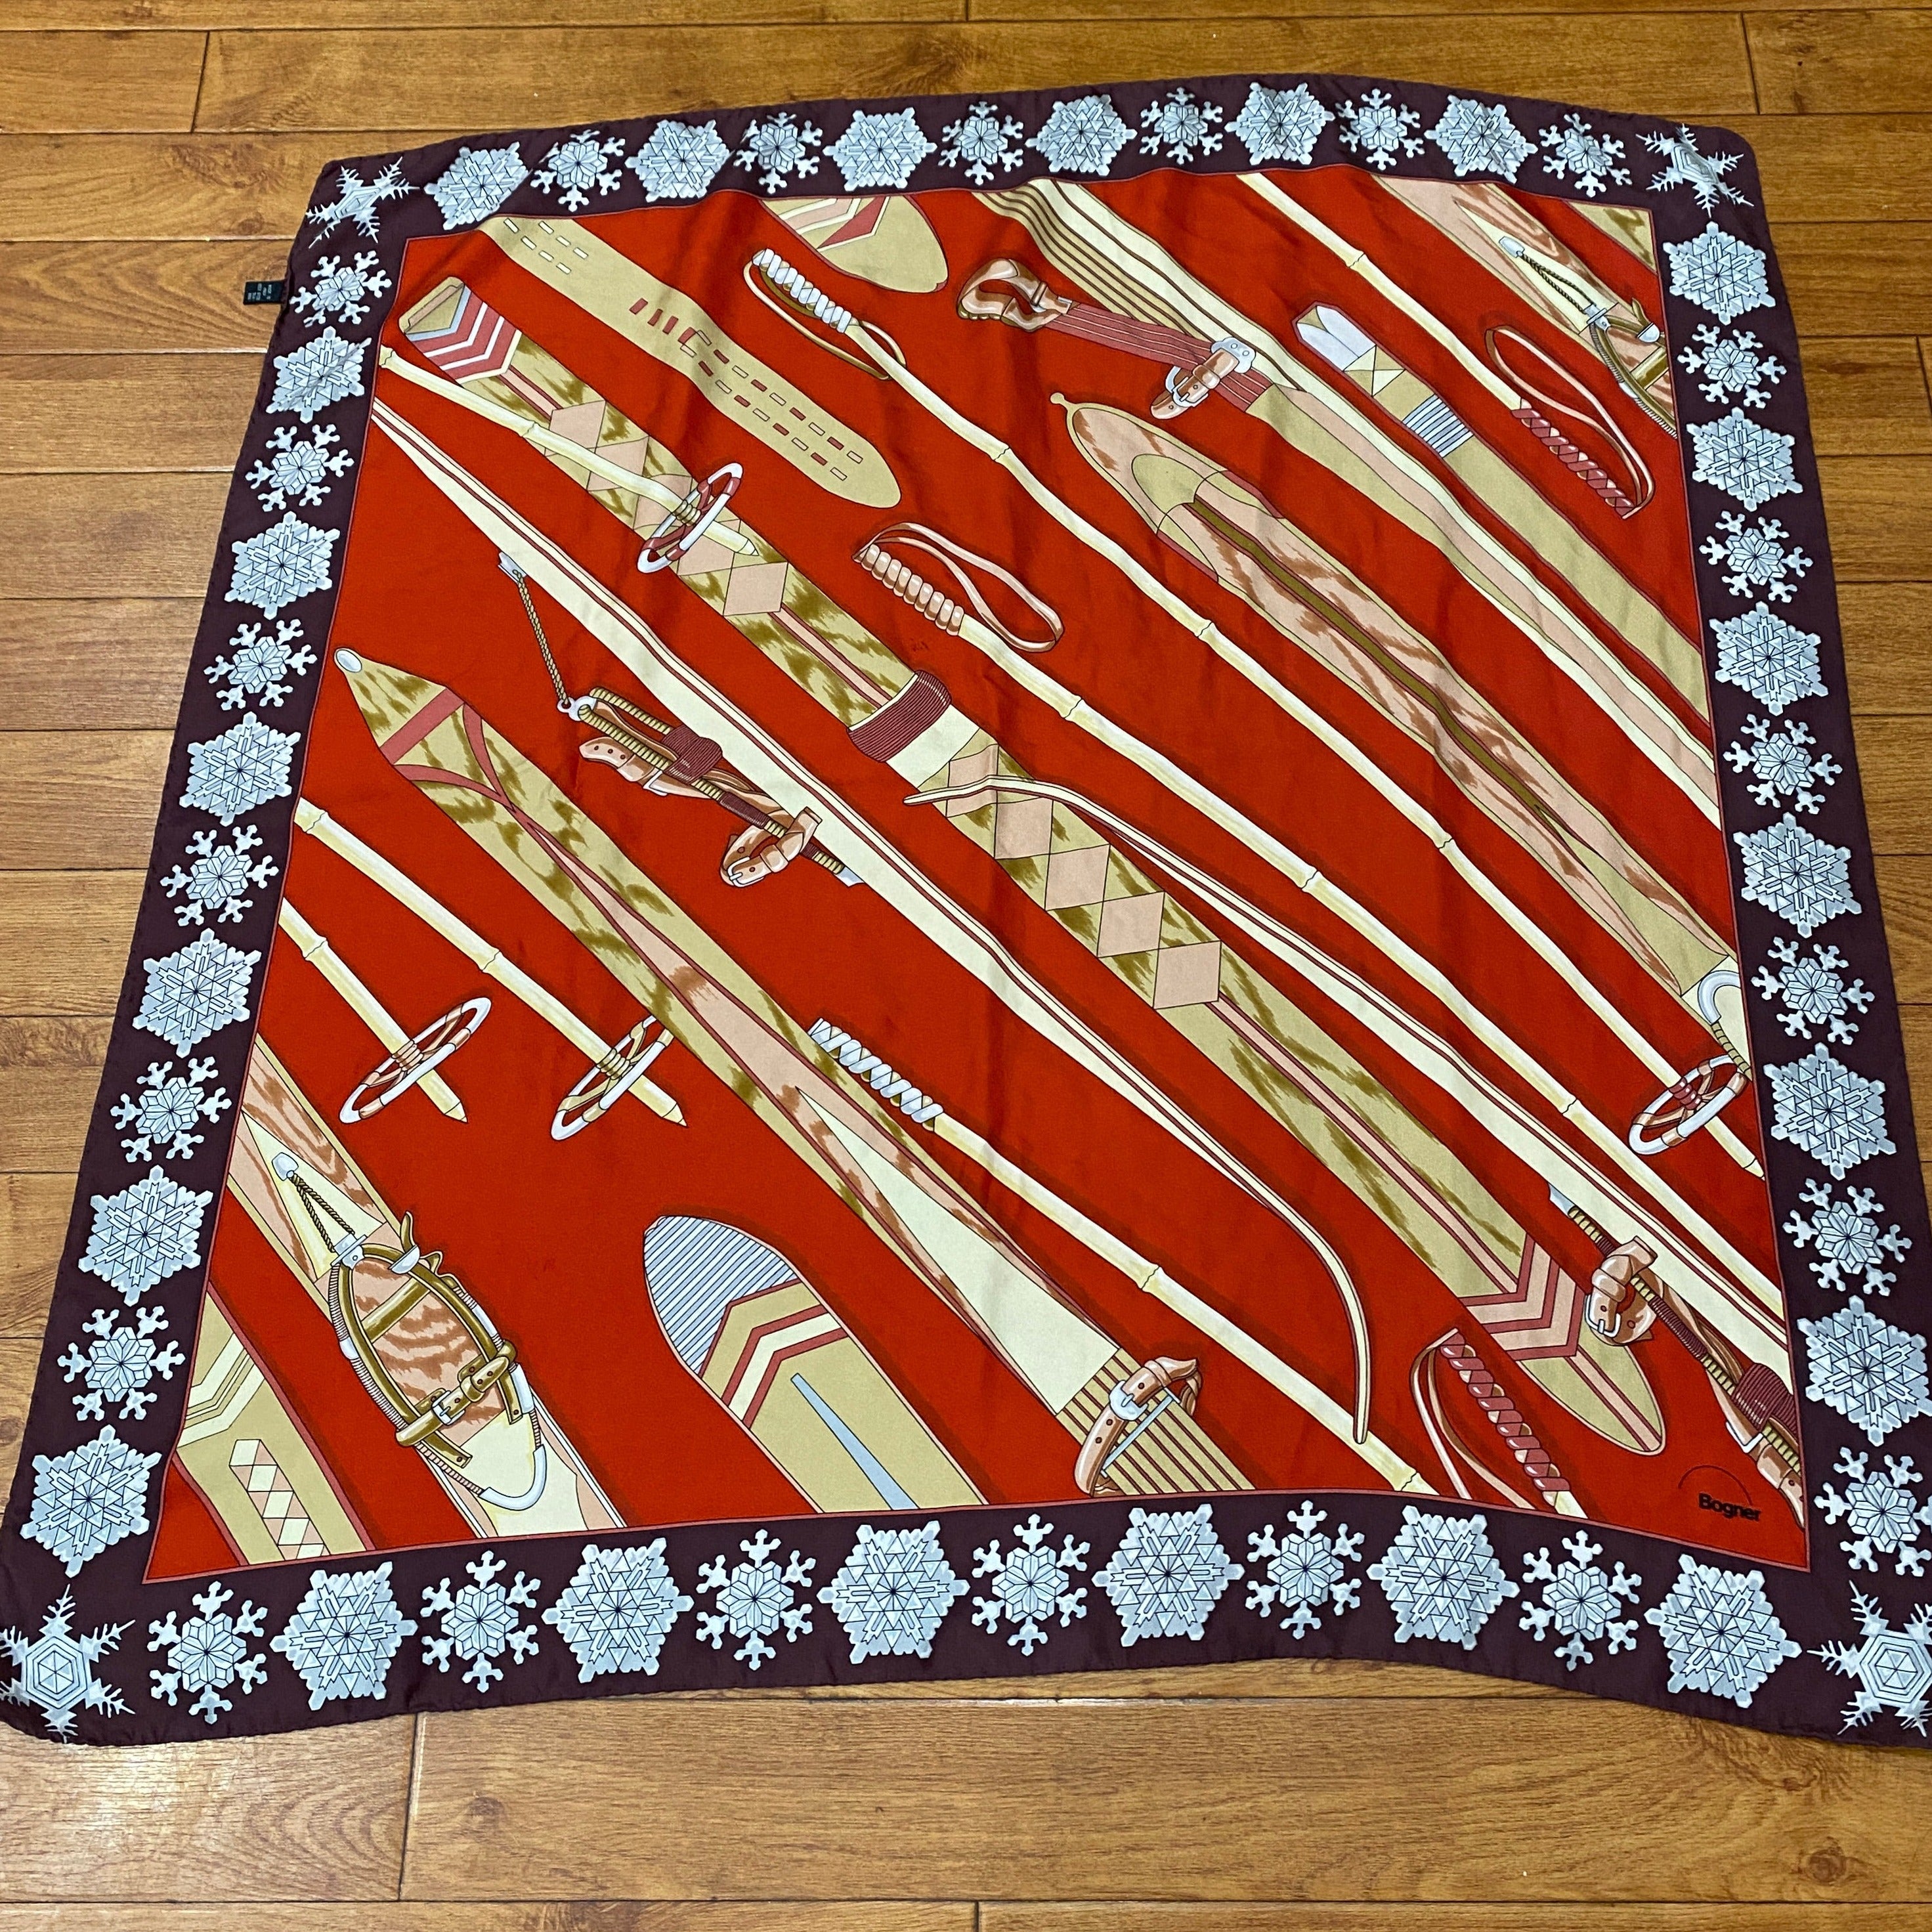 Bogner Silk Vintage Ski Scarf in red, brown white and beige. Snowflakes border the scarf, with the central square illustrating wooden skis and poles. Shown against a wooden background.